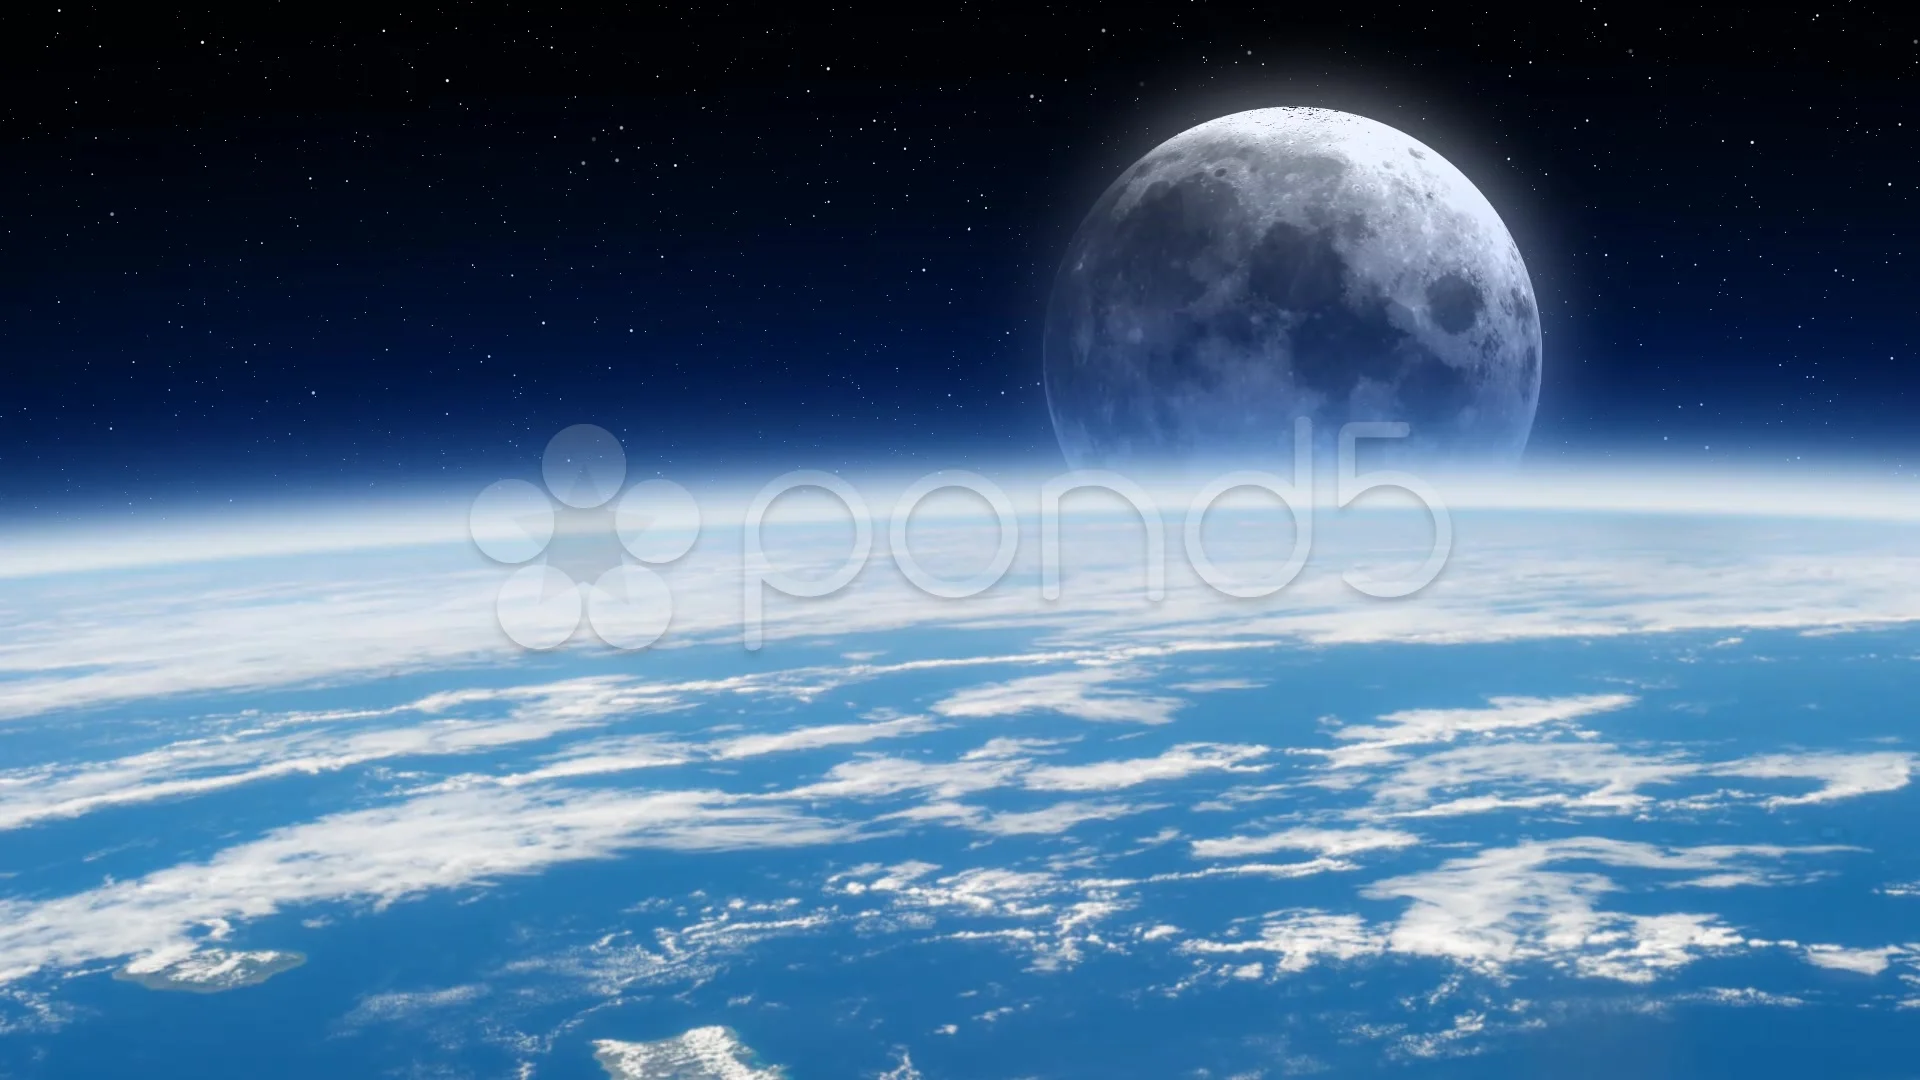 moon view of earth from space